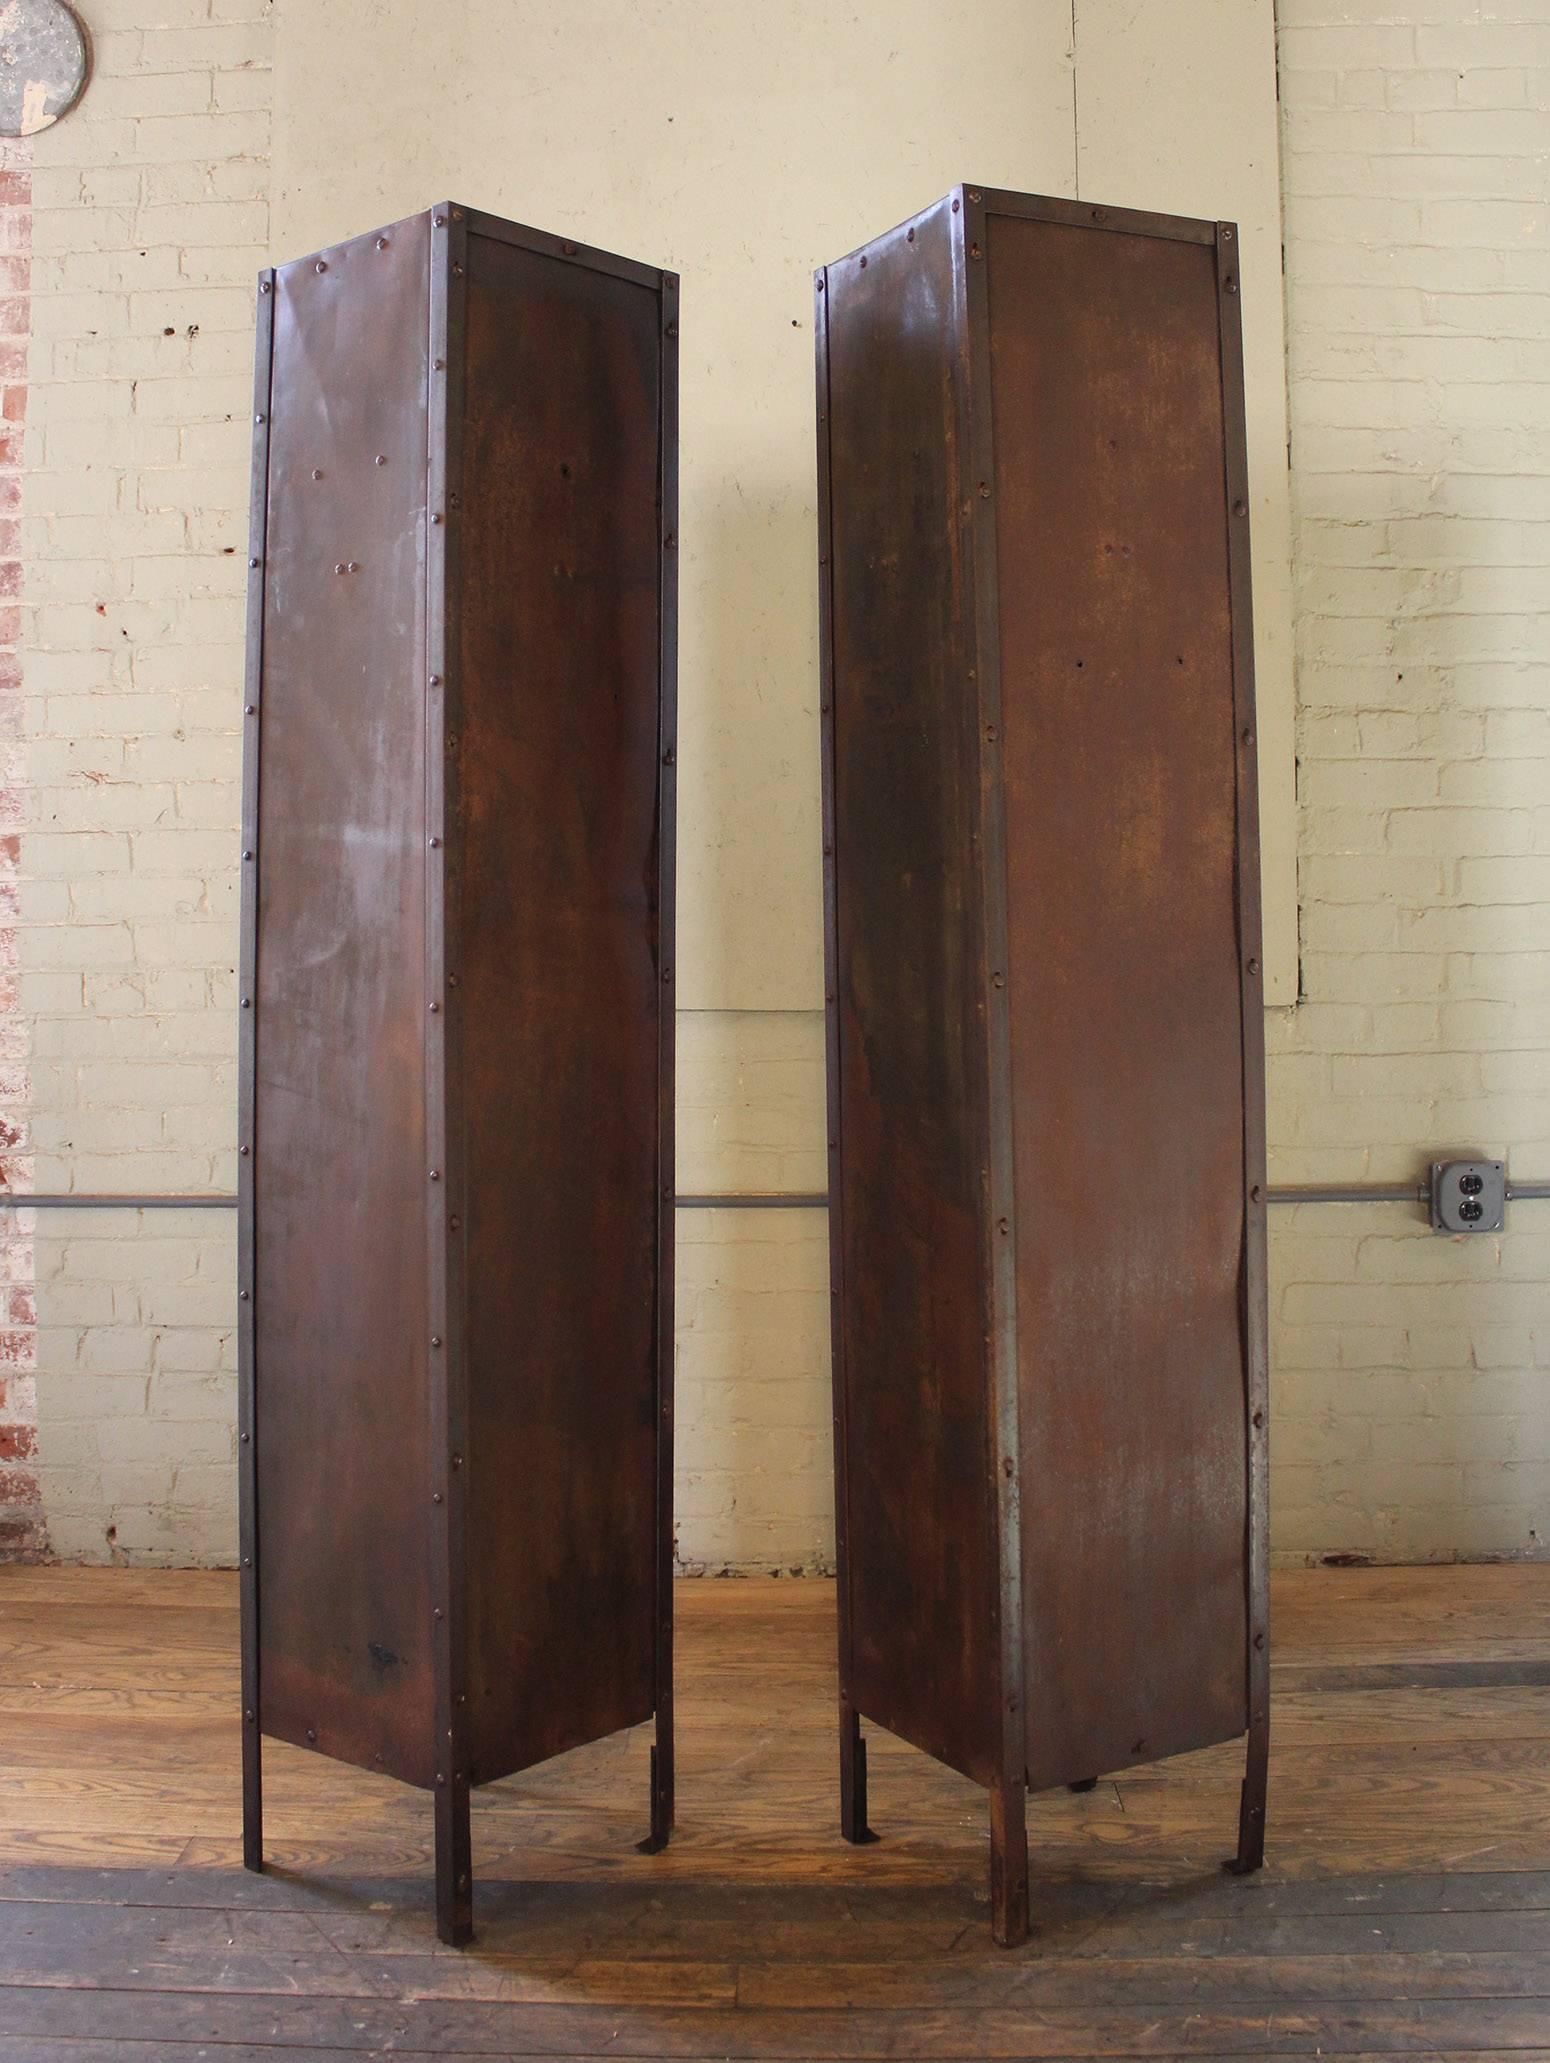 Pair of Vintage Industrial steel Gym storage lockers with coat hooks and shelves. Overall dimensions are 66